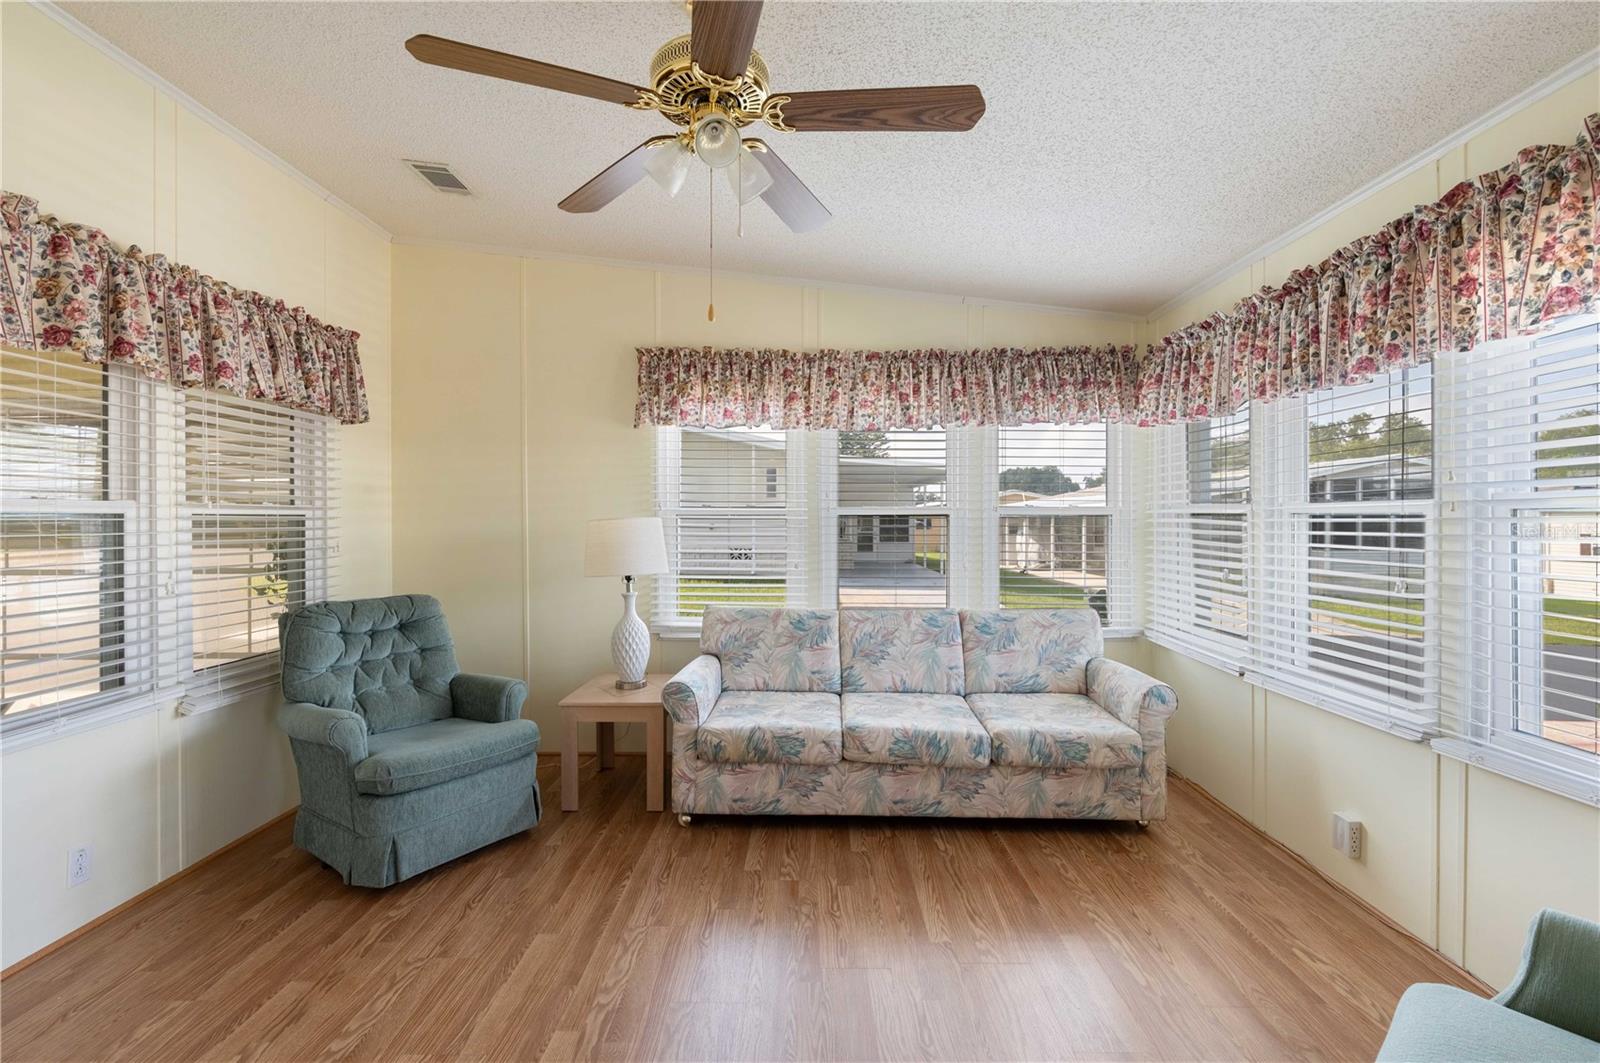 Front Florida room is heated and cooled on central system. Note many double pane windows, ceiling fan, and laminate flooring.